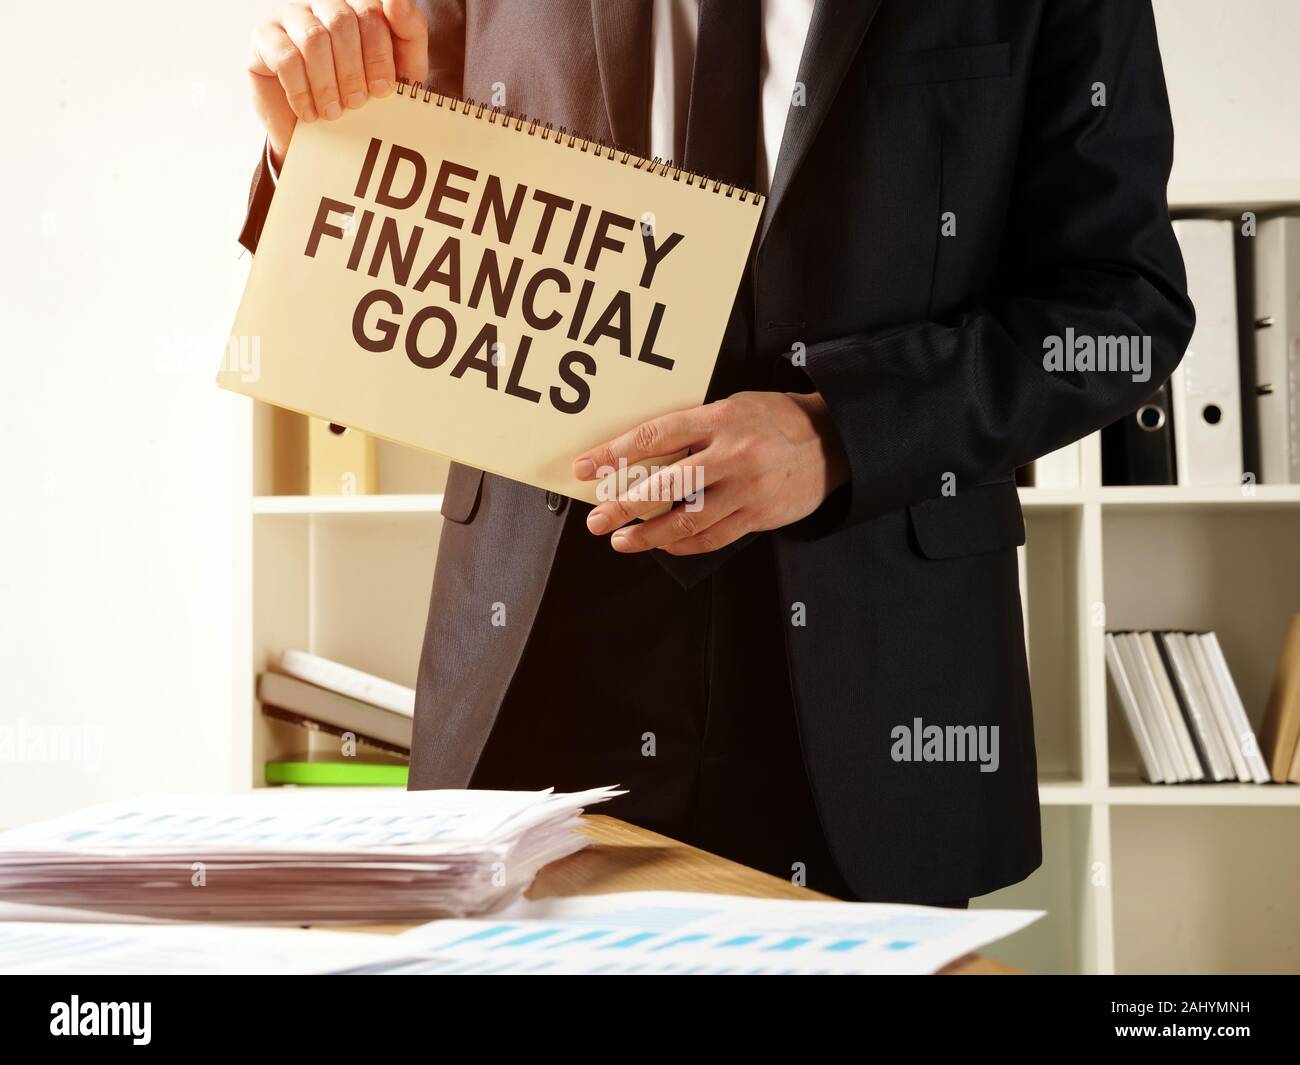 The consultant holds the inscription Identify financial goals. Stock Photo